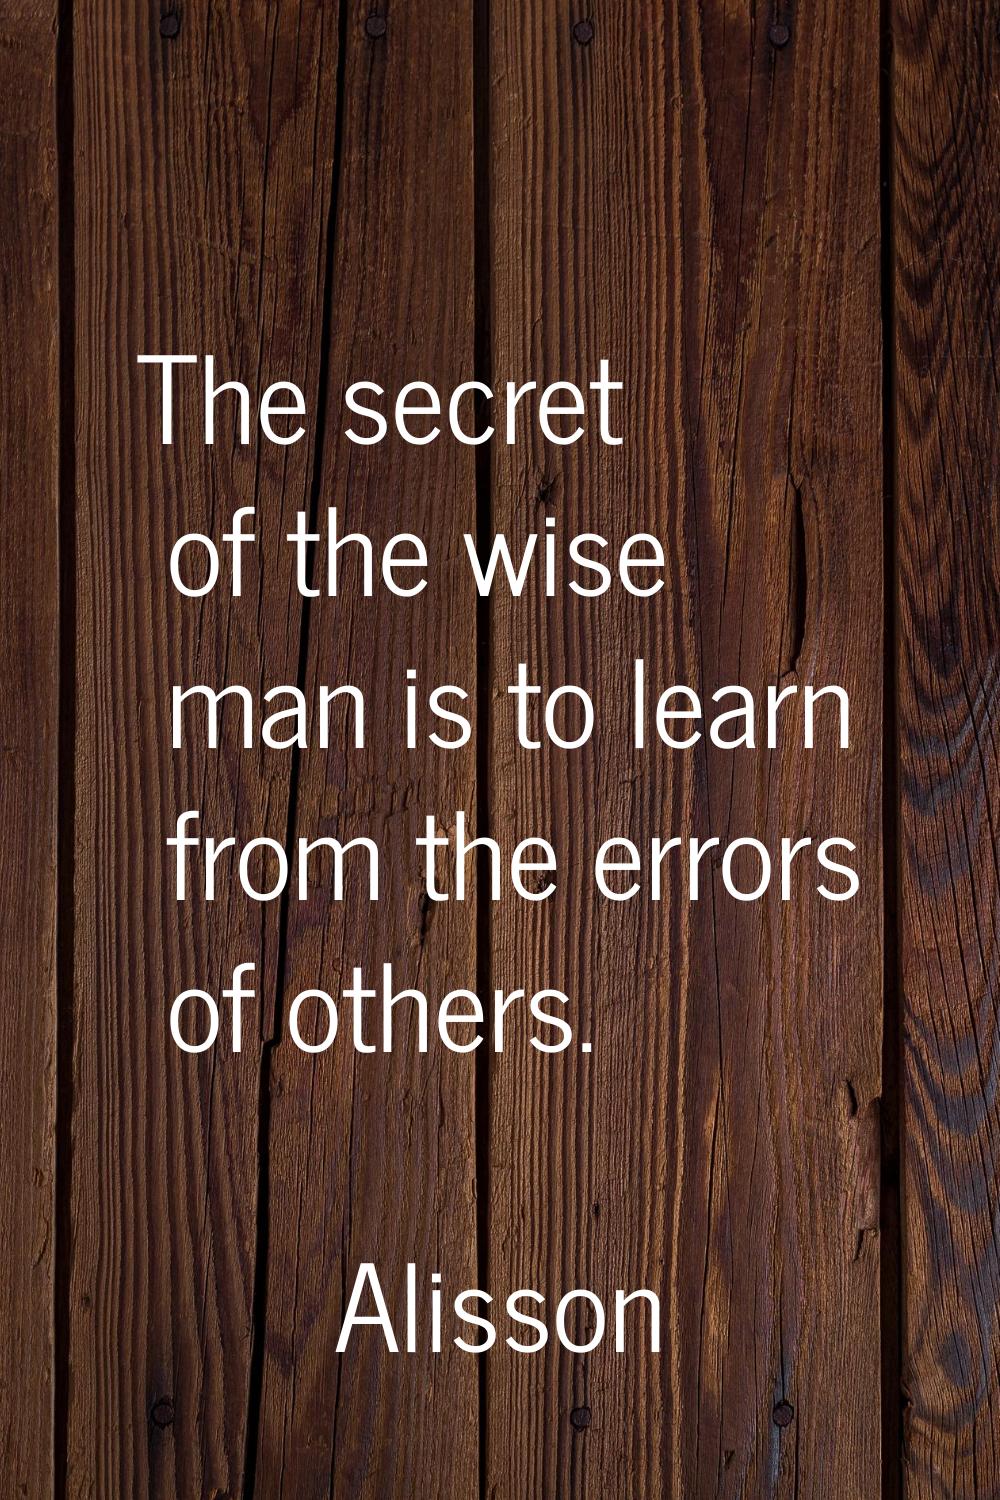 The secret of the wise man is to learn from the errors of others.